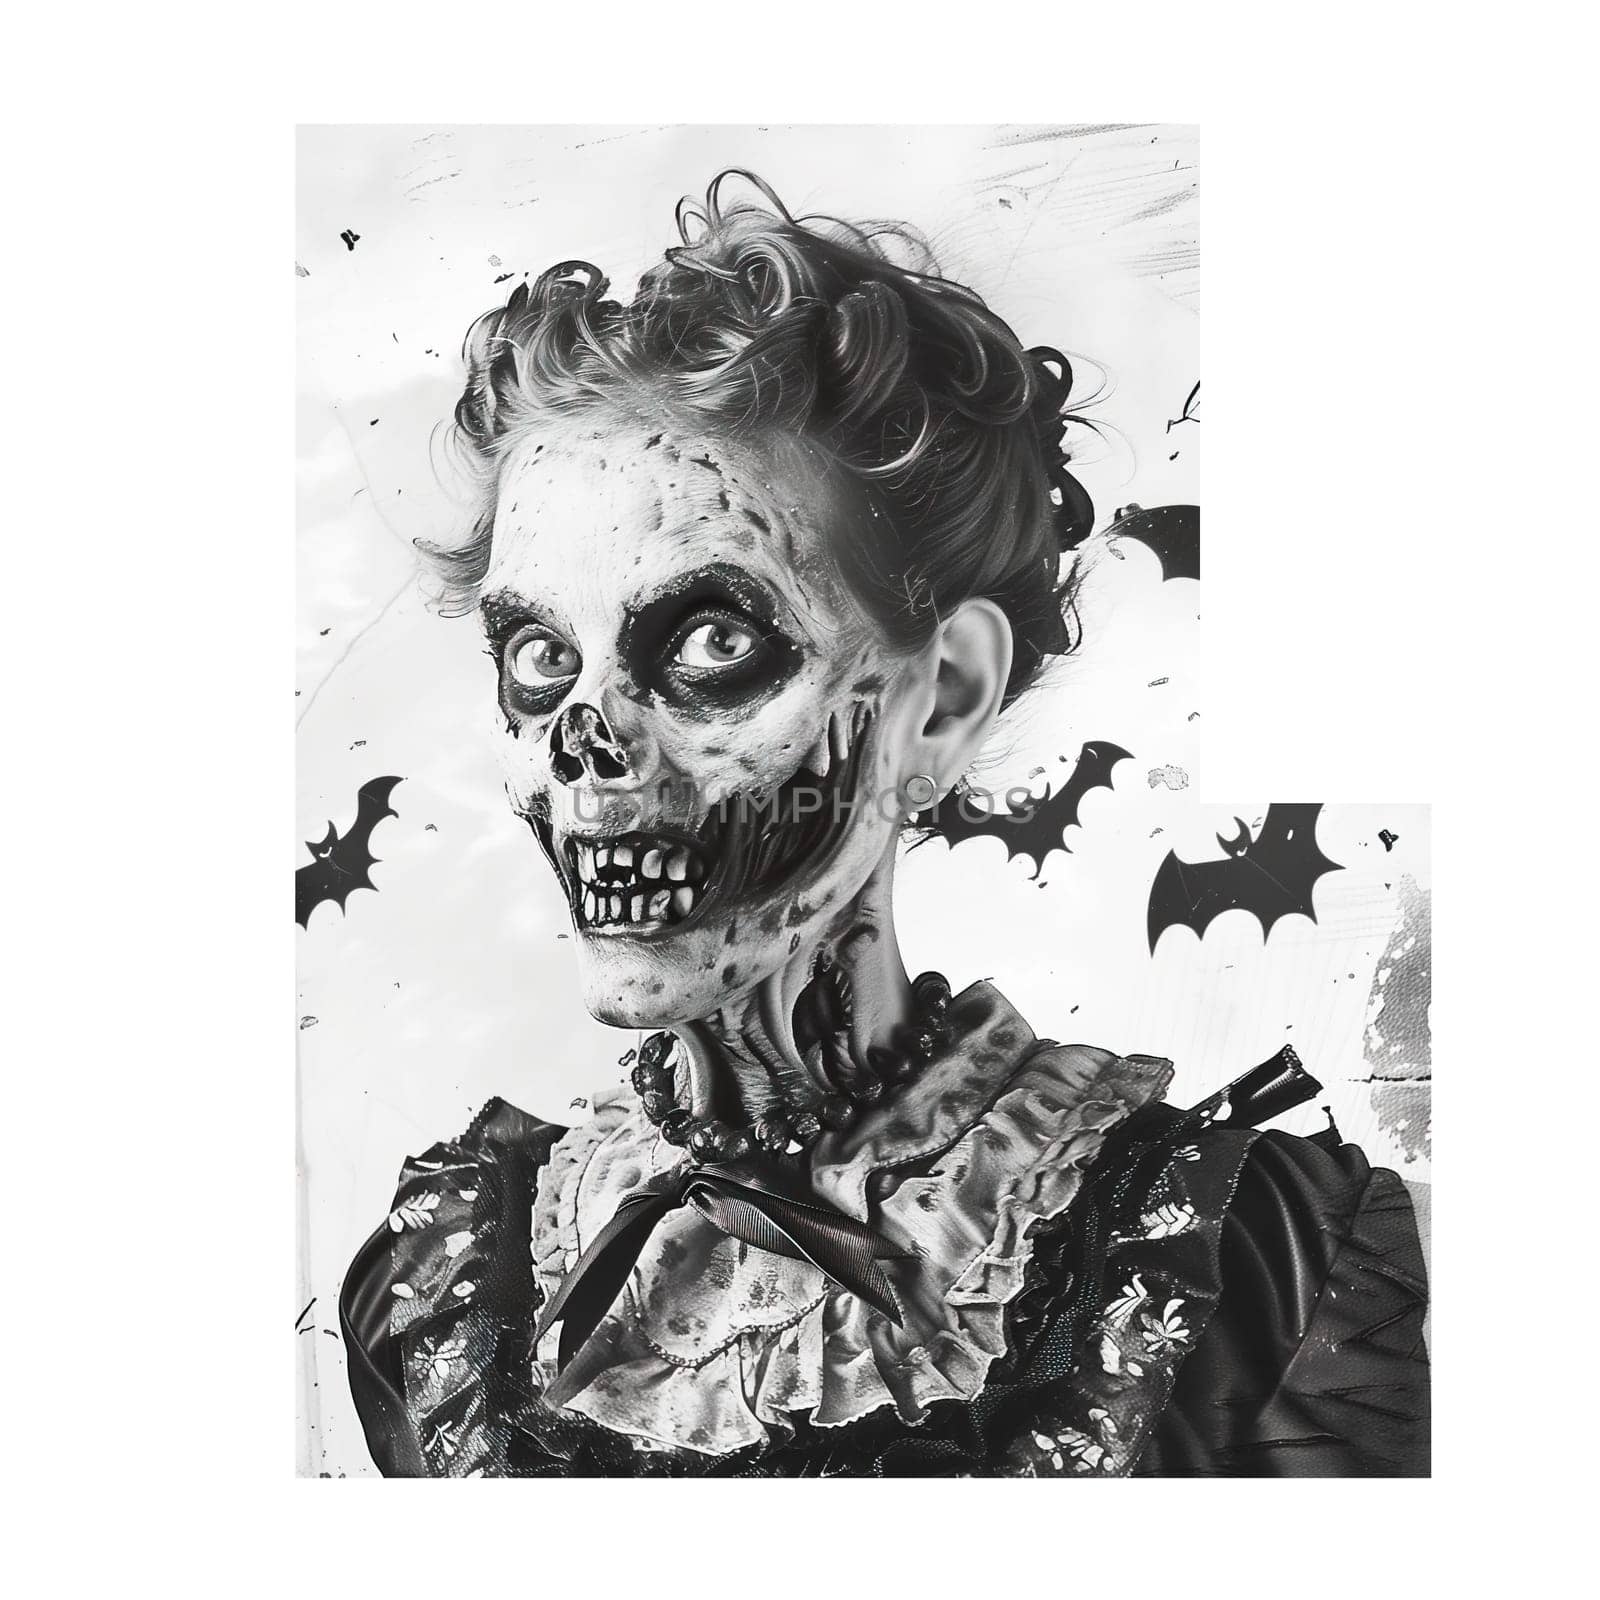 Monochrome vintage photo of halloween zombie cut out image by Dustick